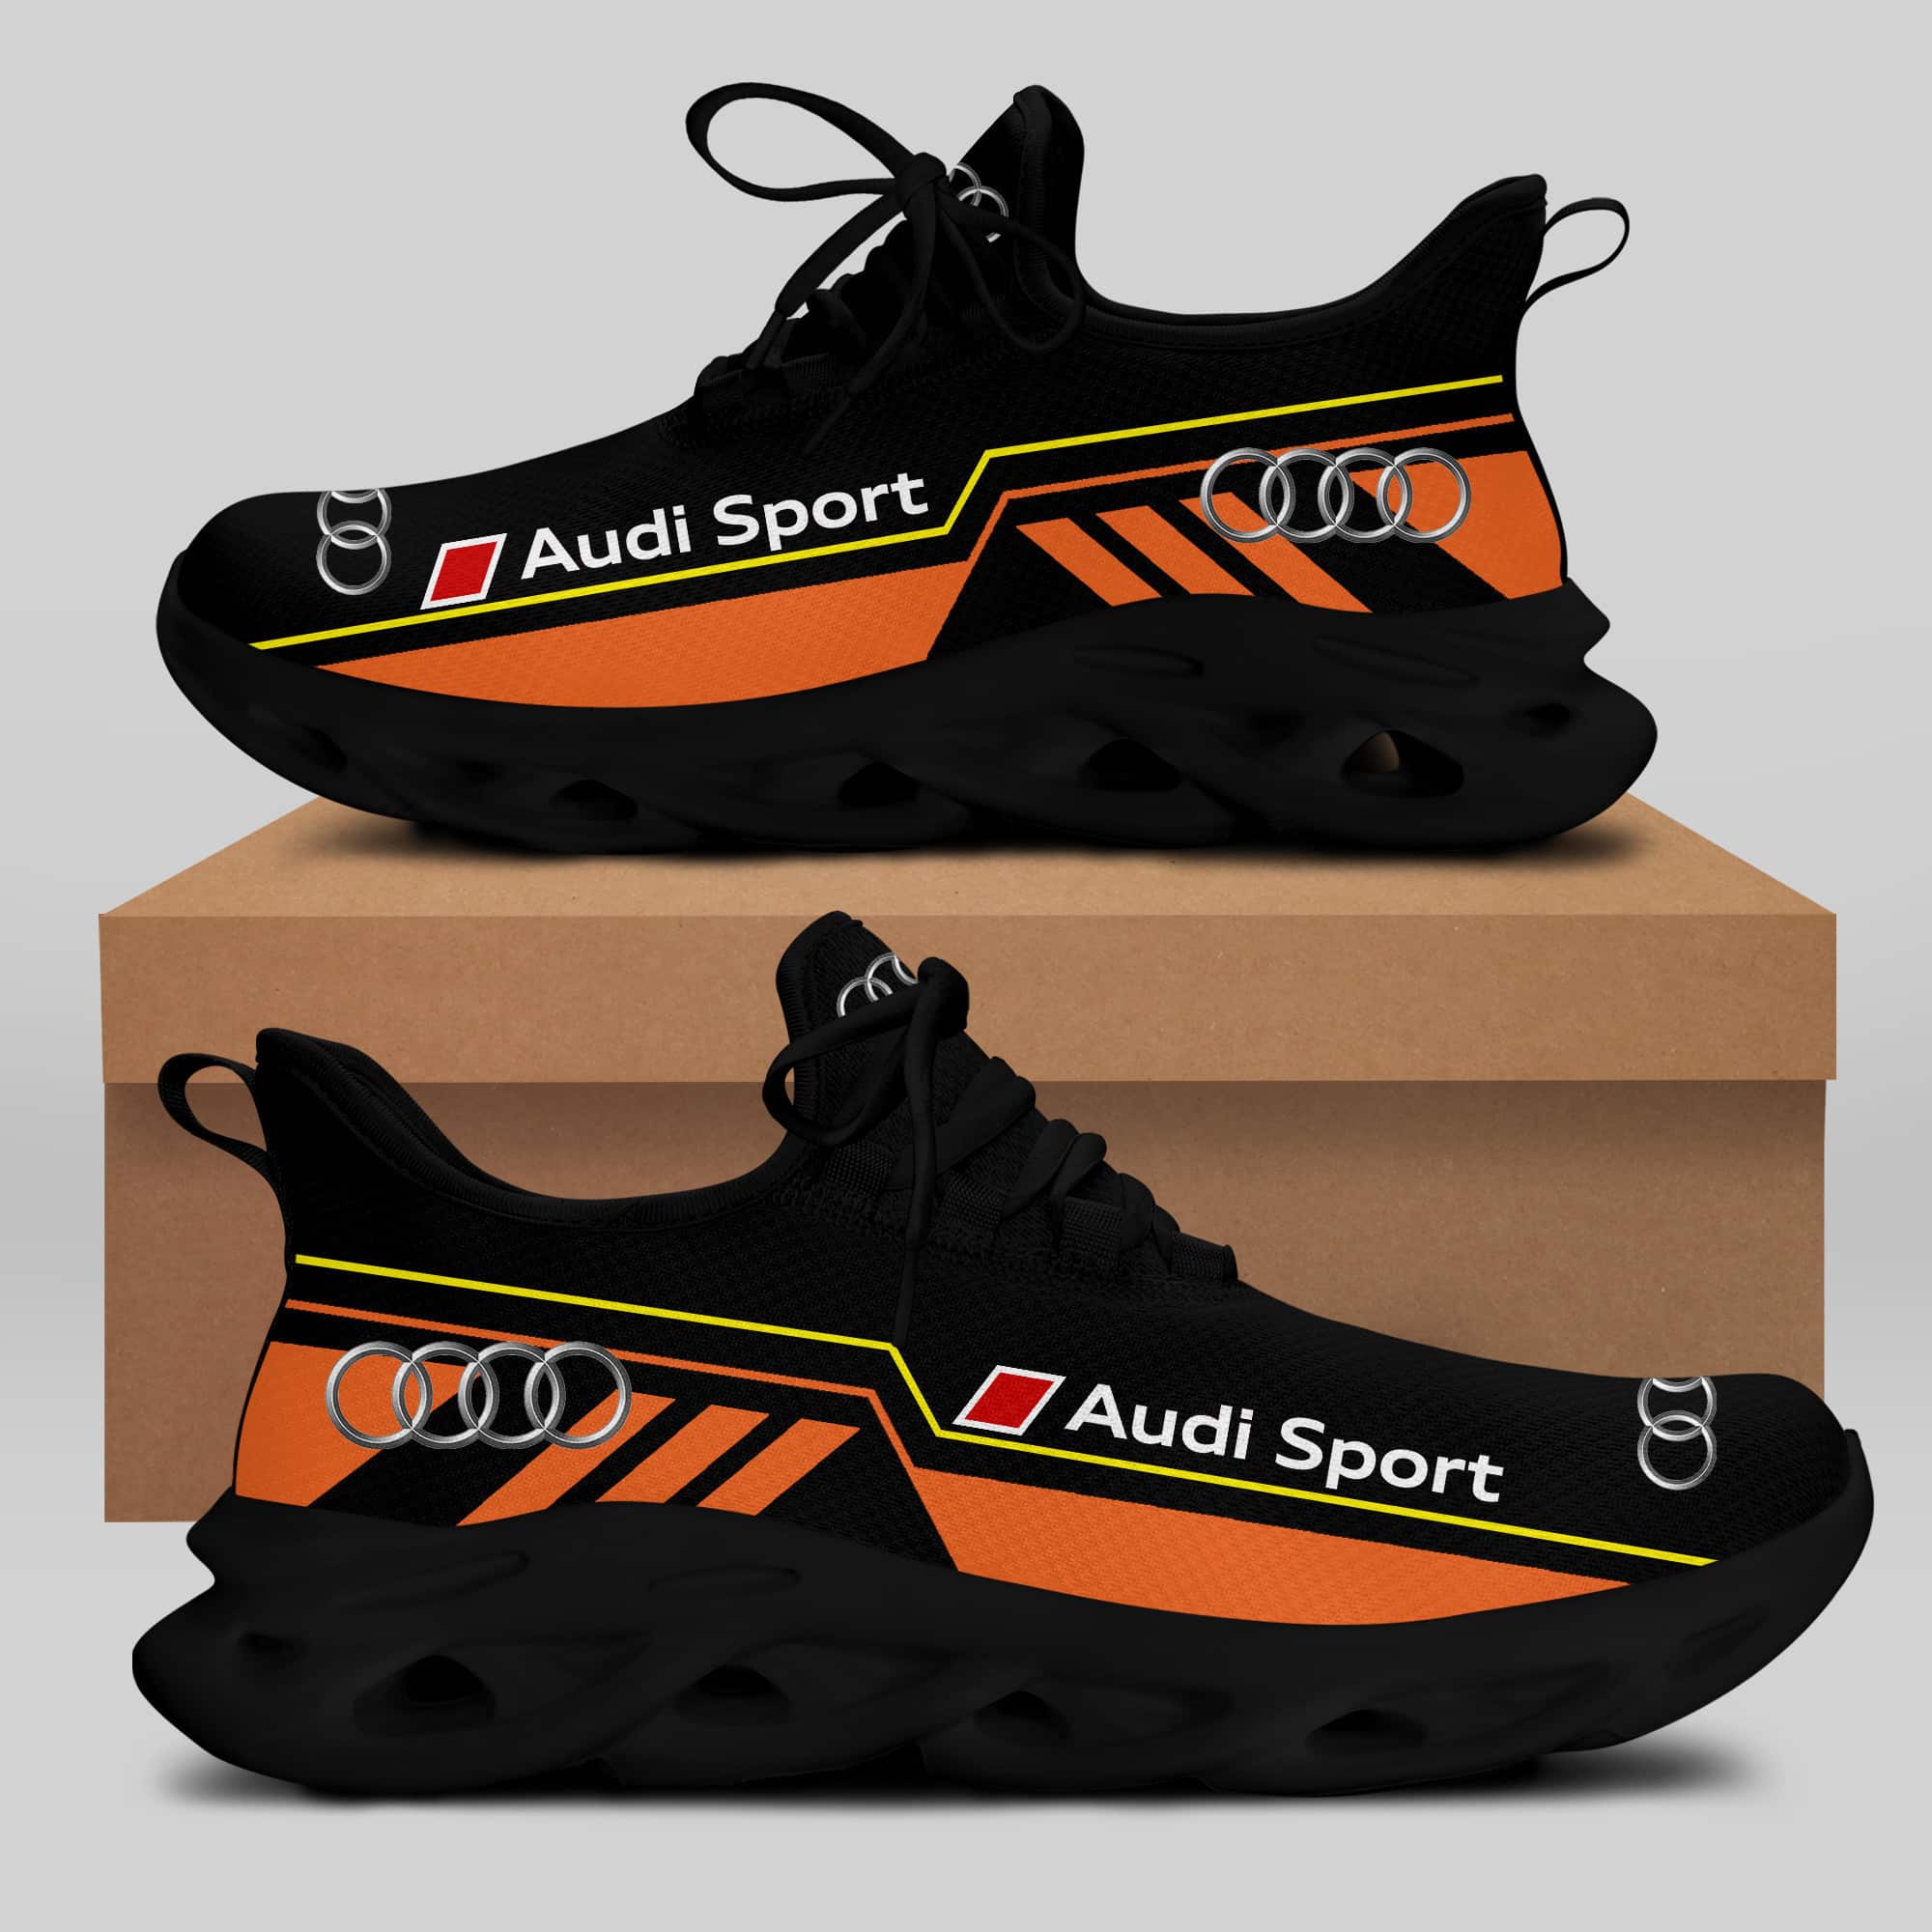 Audi Sport Running Shoes Max Soul Shoes Sneakers Ver 39 1